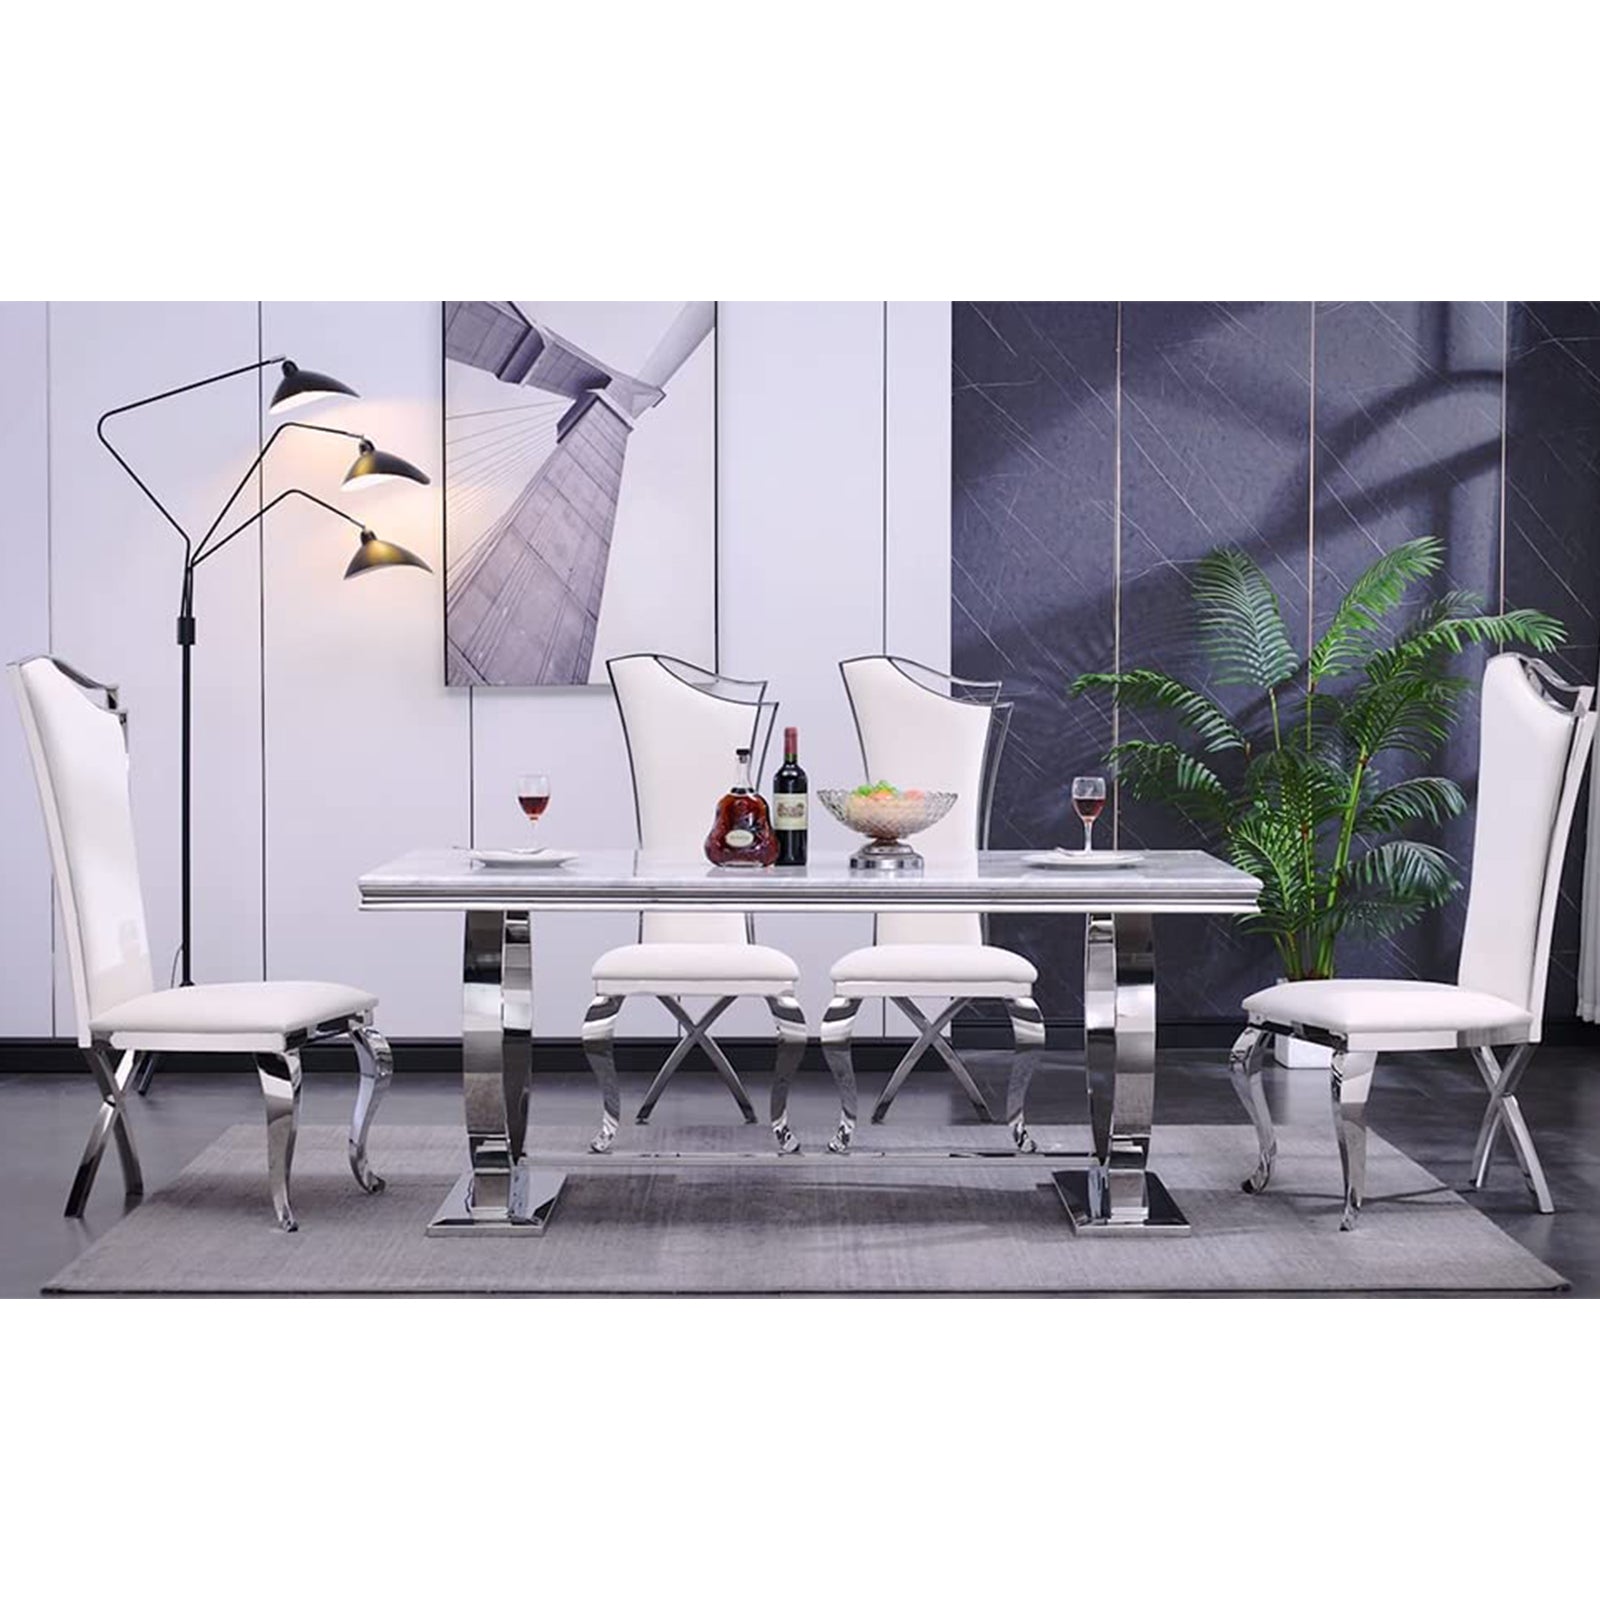 606-Set | AUZ White and Silver Dining room Sets for 6